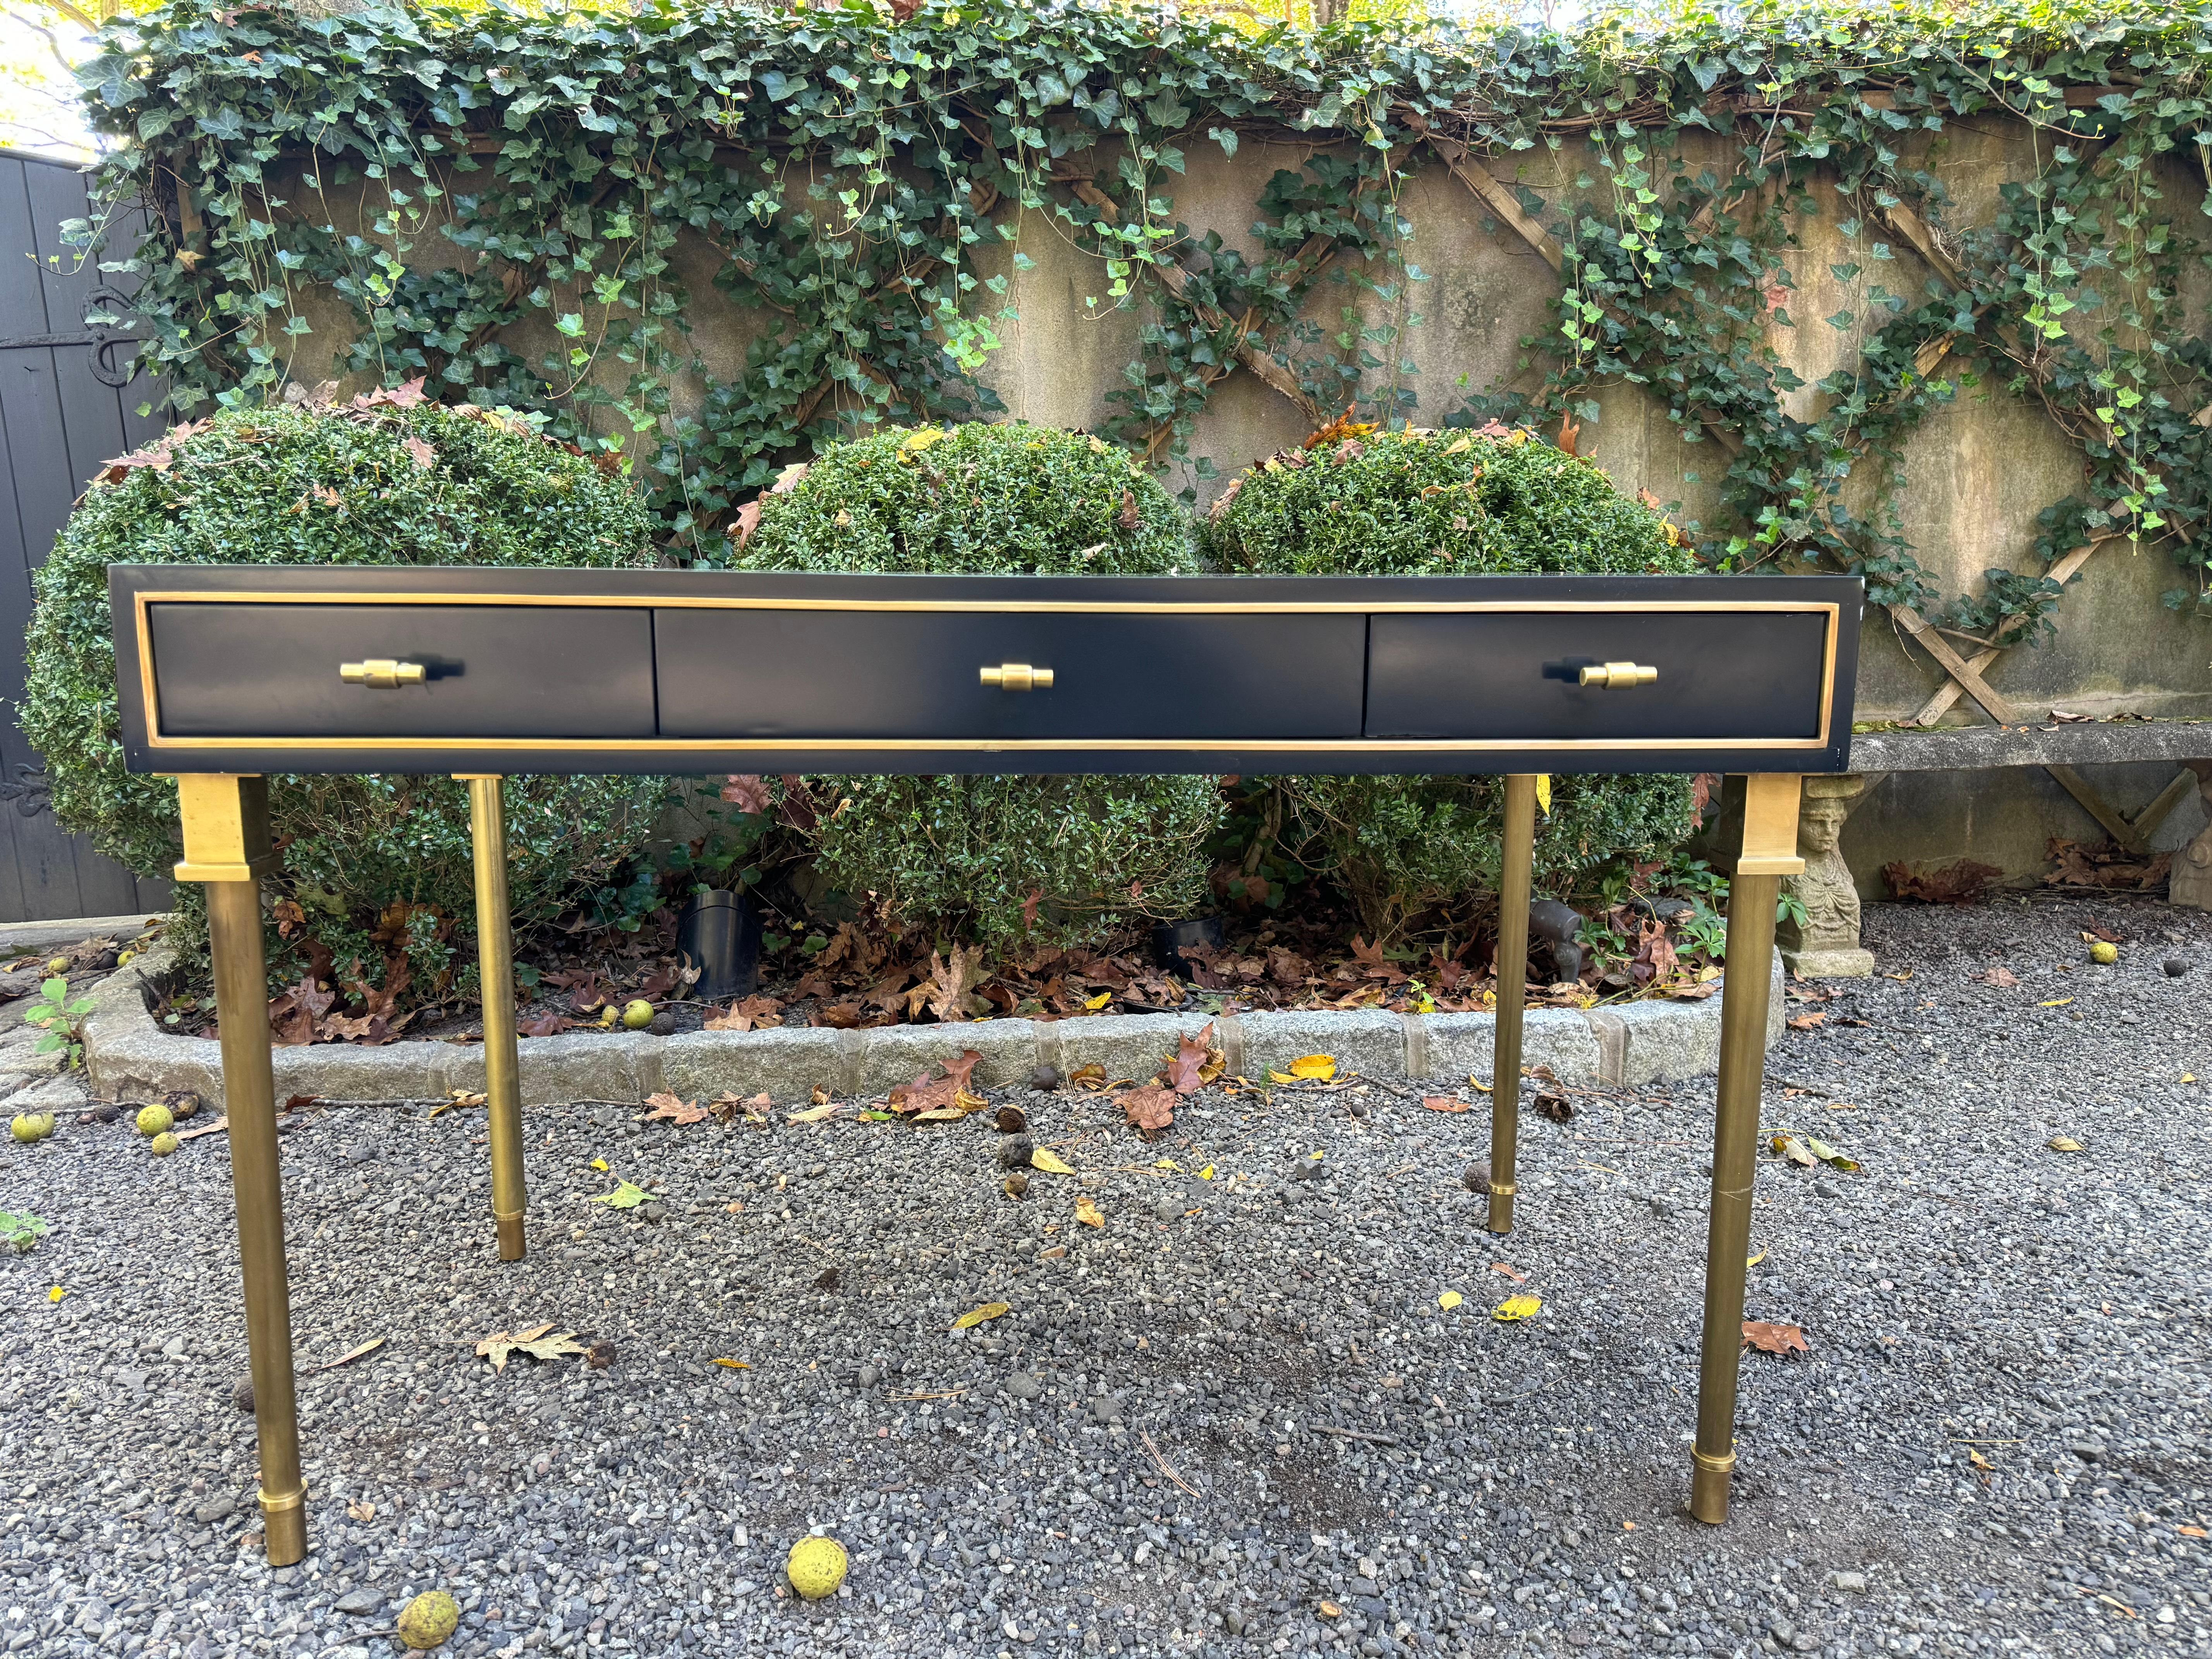 Stunning black laquered heavy beautifully constructed desk in the style of Maison Jansen having brass legs, hardware and trim that's a striking contrast and compliment to the black desk.  There are 3 drawers on one side, but the entire desk is